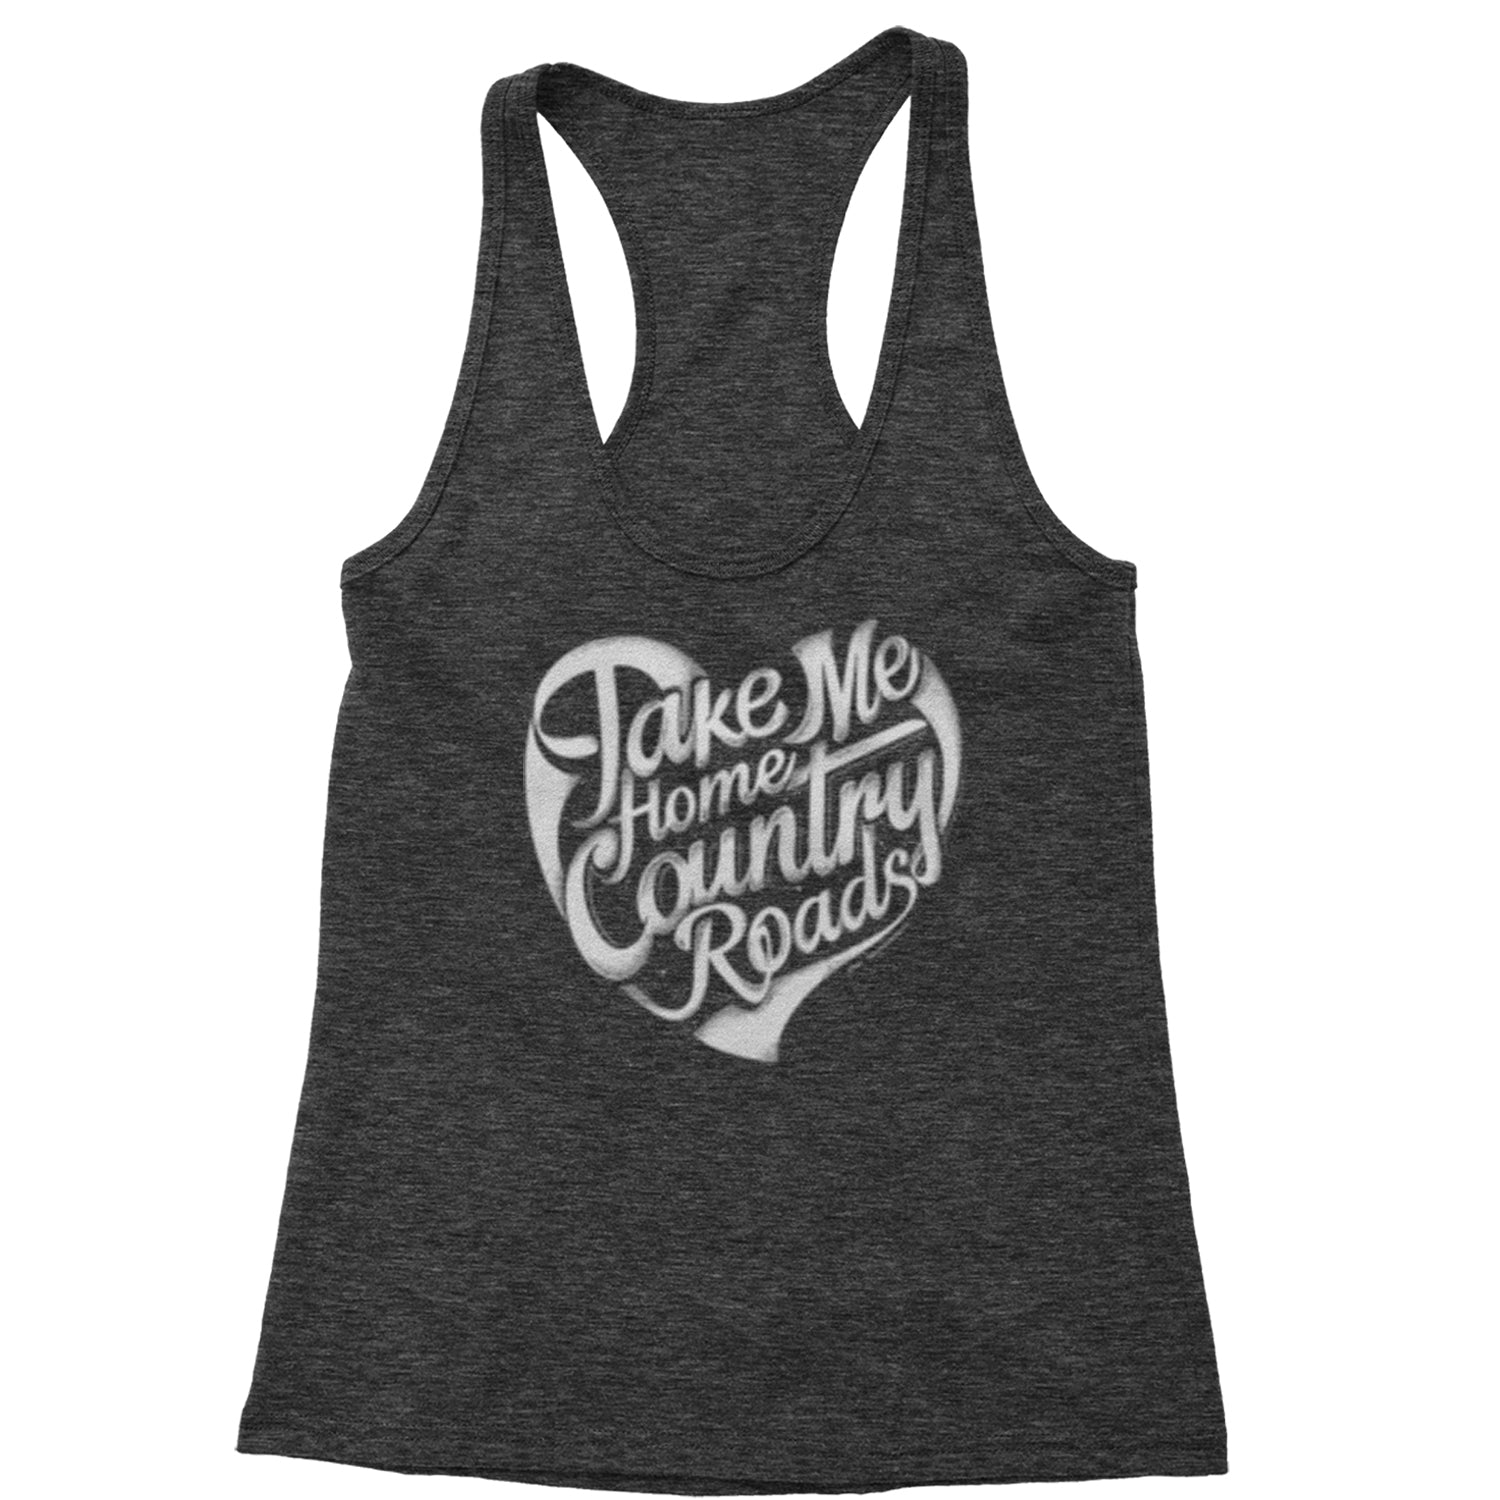 Take Me Home Country Roads Racerback Tank Top for Women country, karaoke, roads by Expression Tees